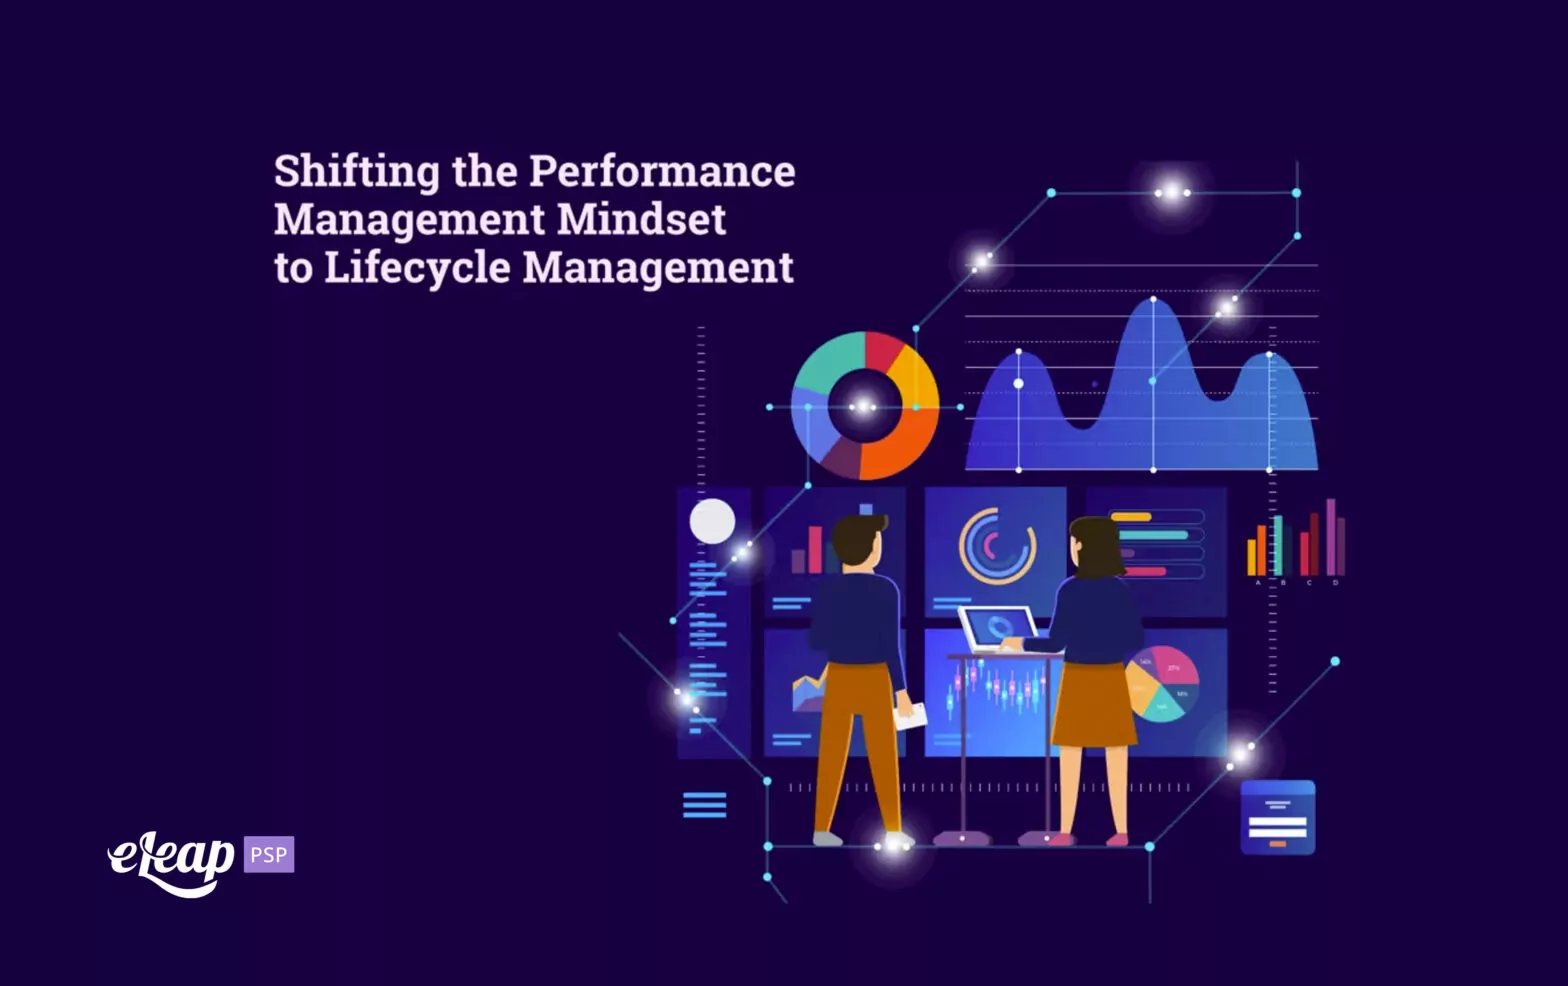 Shifting the Performance Management Mindset to Lifecycle Management